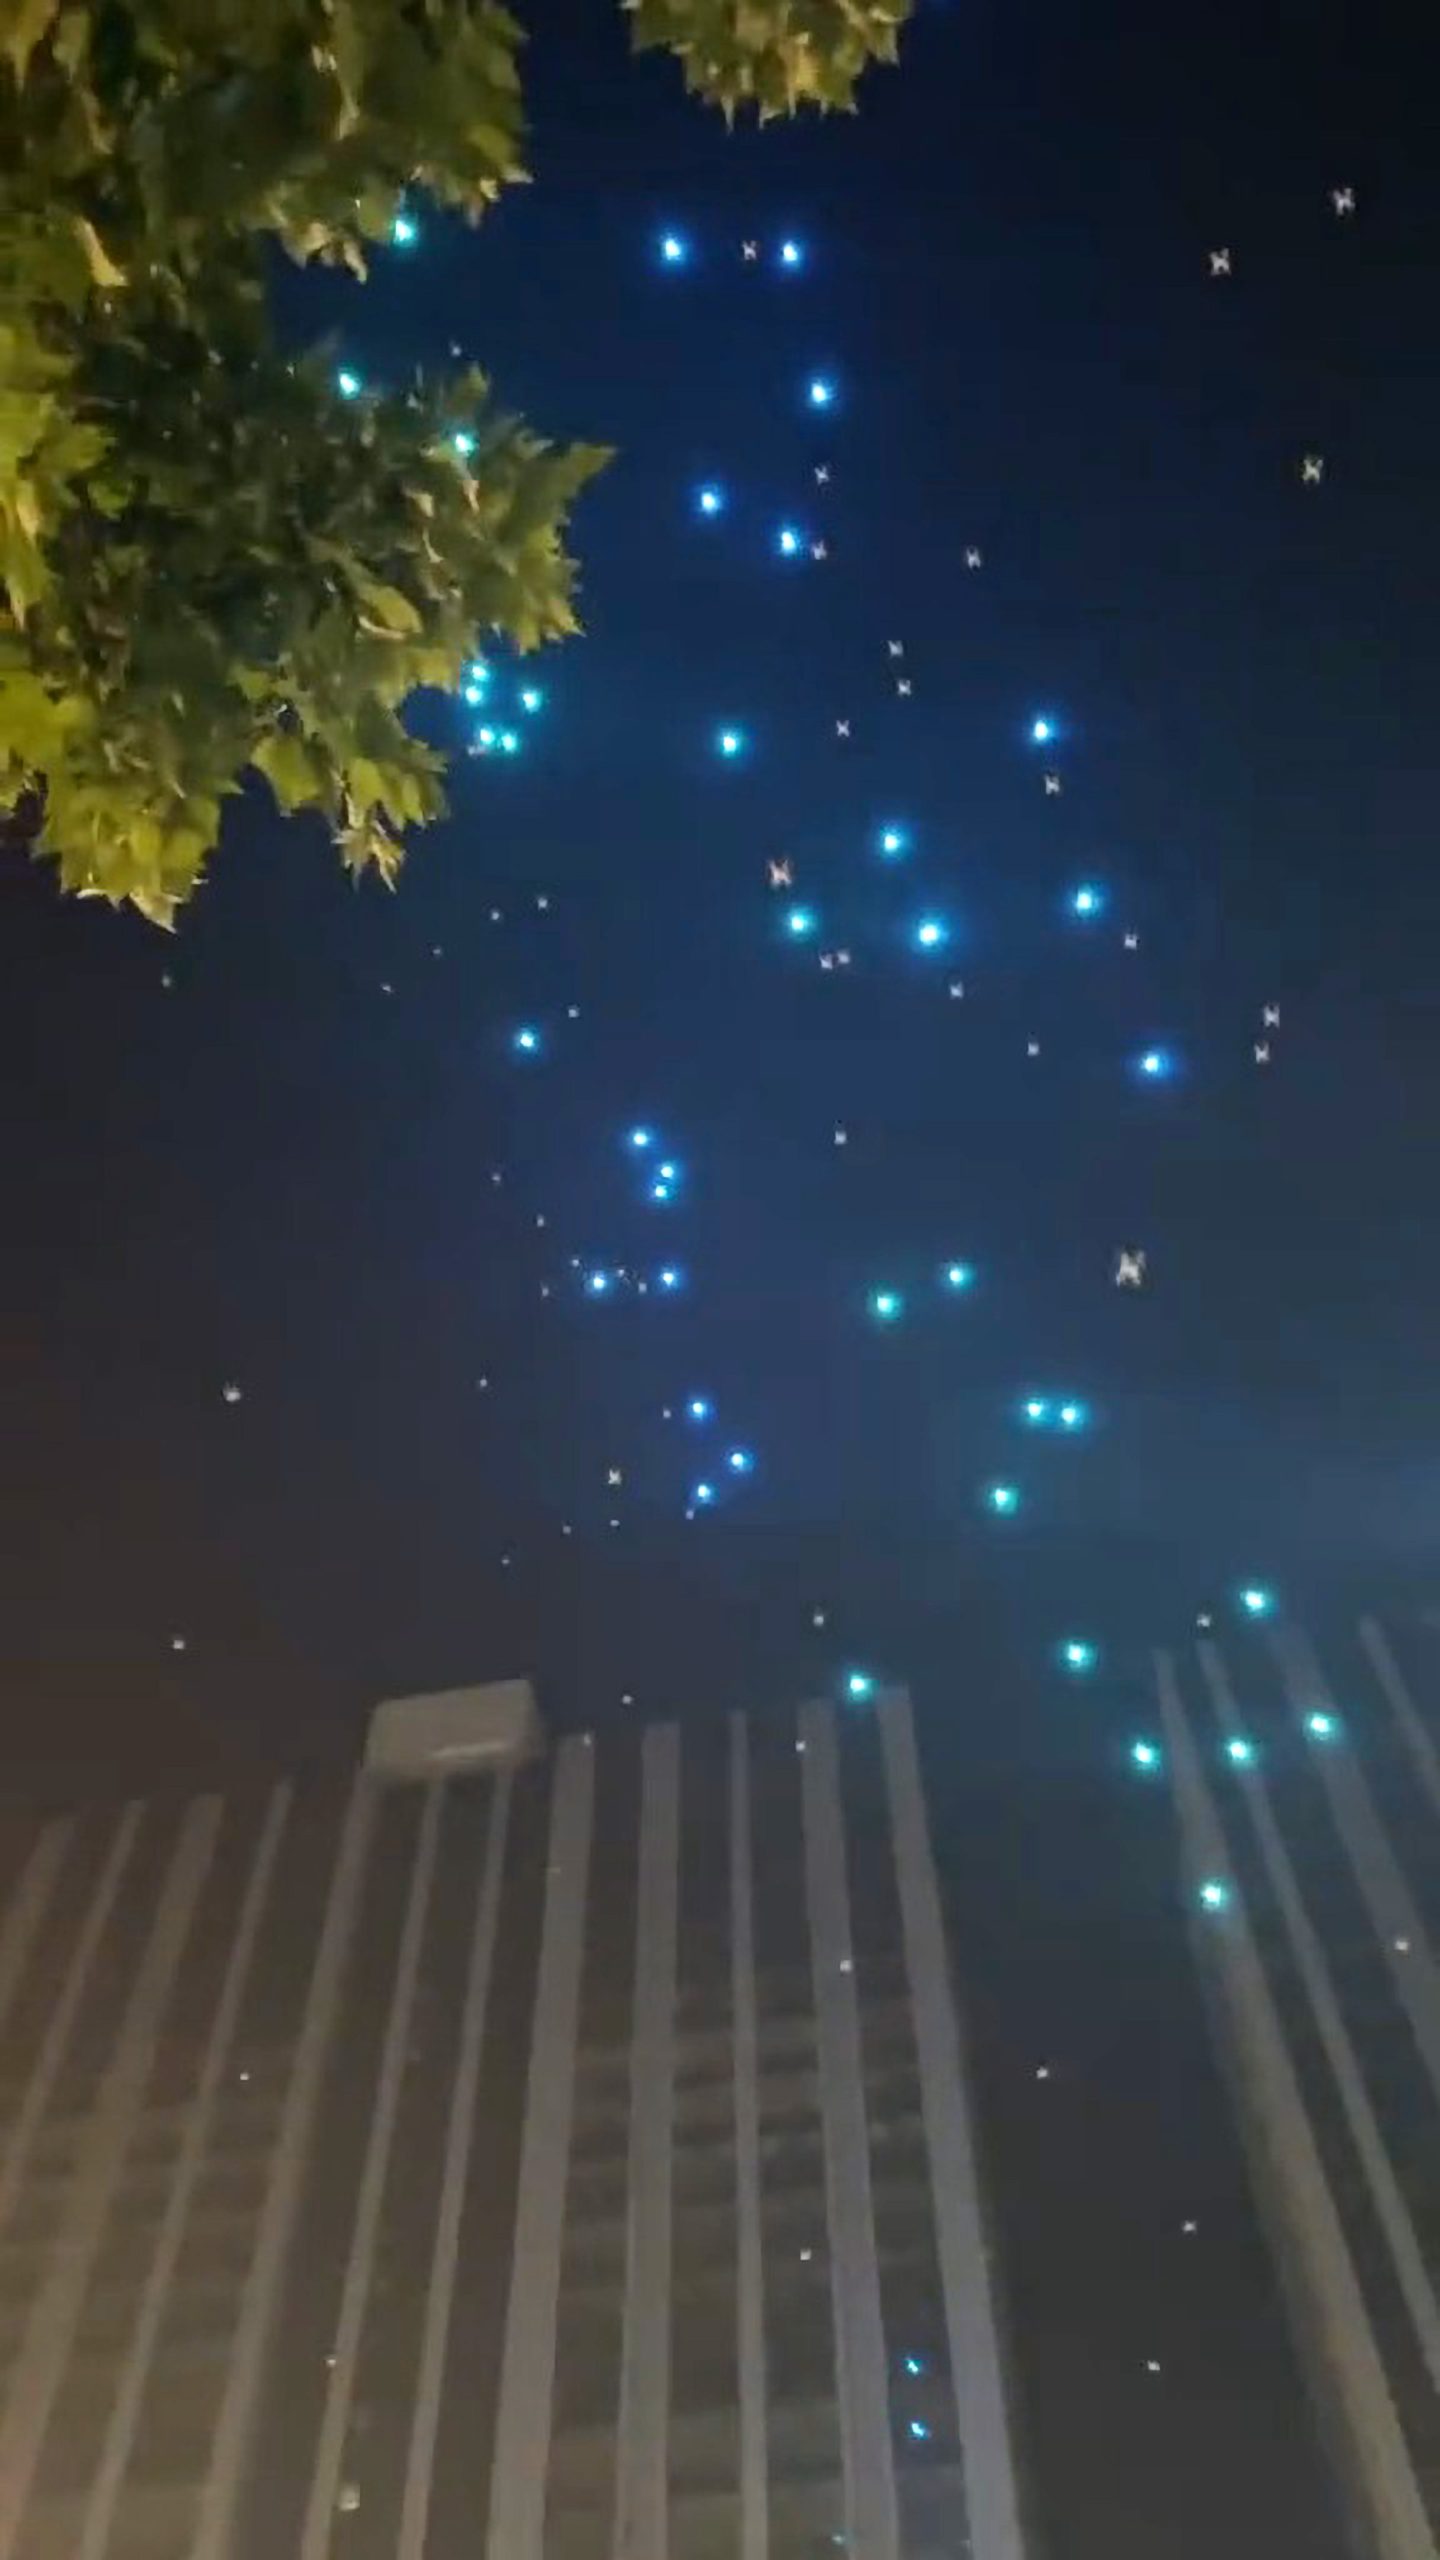 Read more about the article Dozens Of Drones In Light Show Plummet From Sky Into Spectators Arms In Suspected Hacking Incident